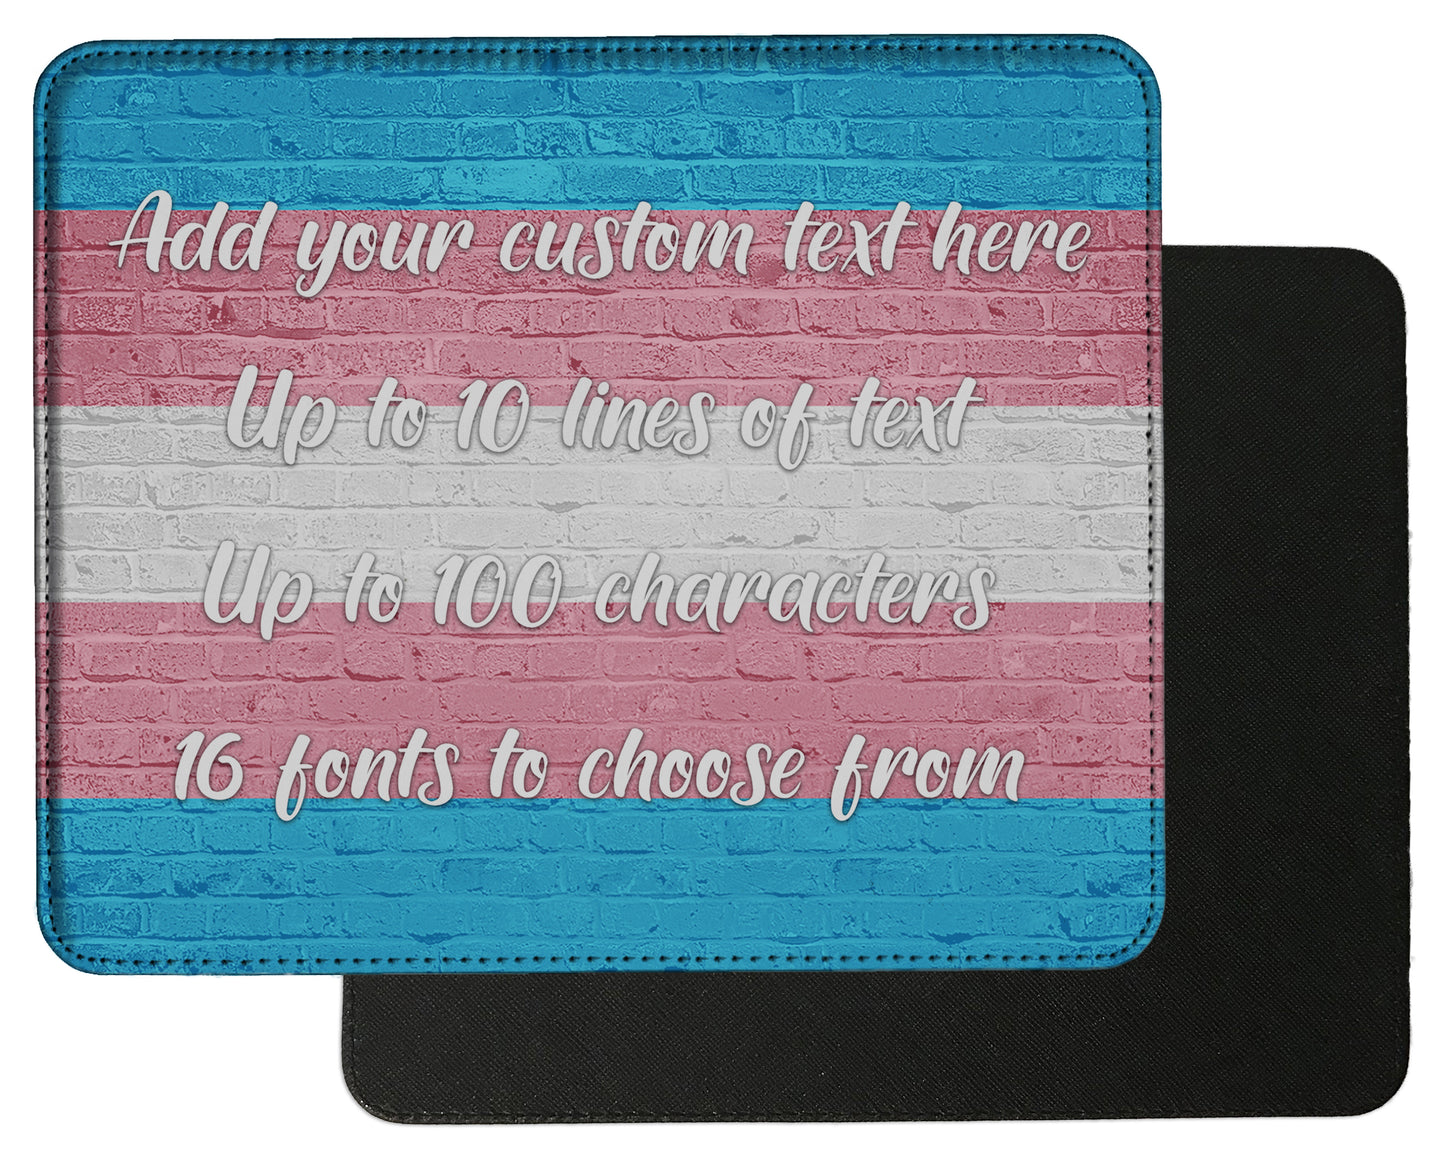 Trans Pride Flag Mouse Pad